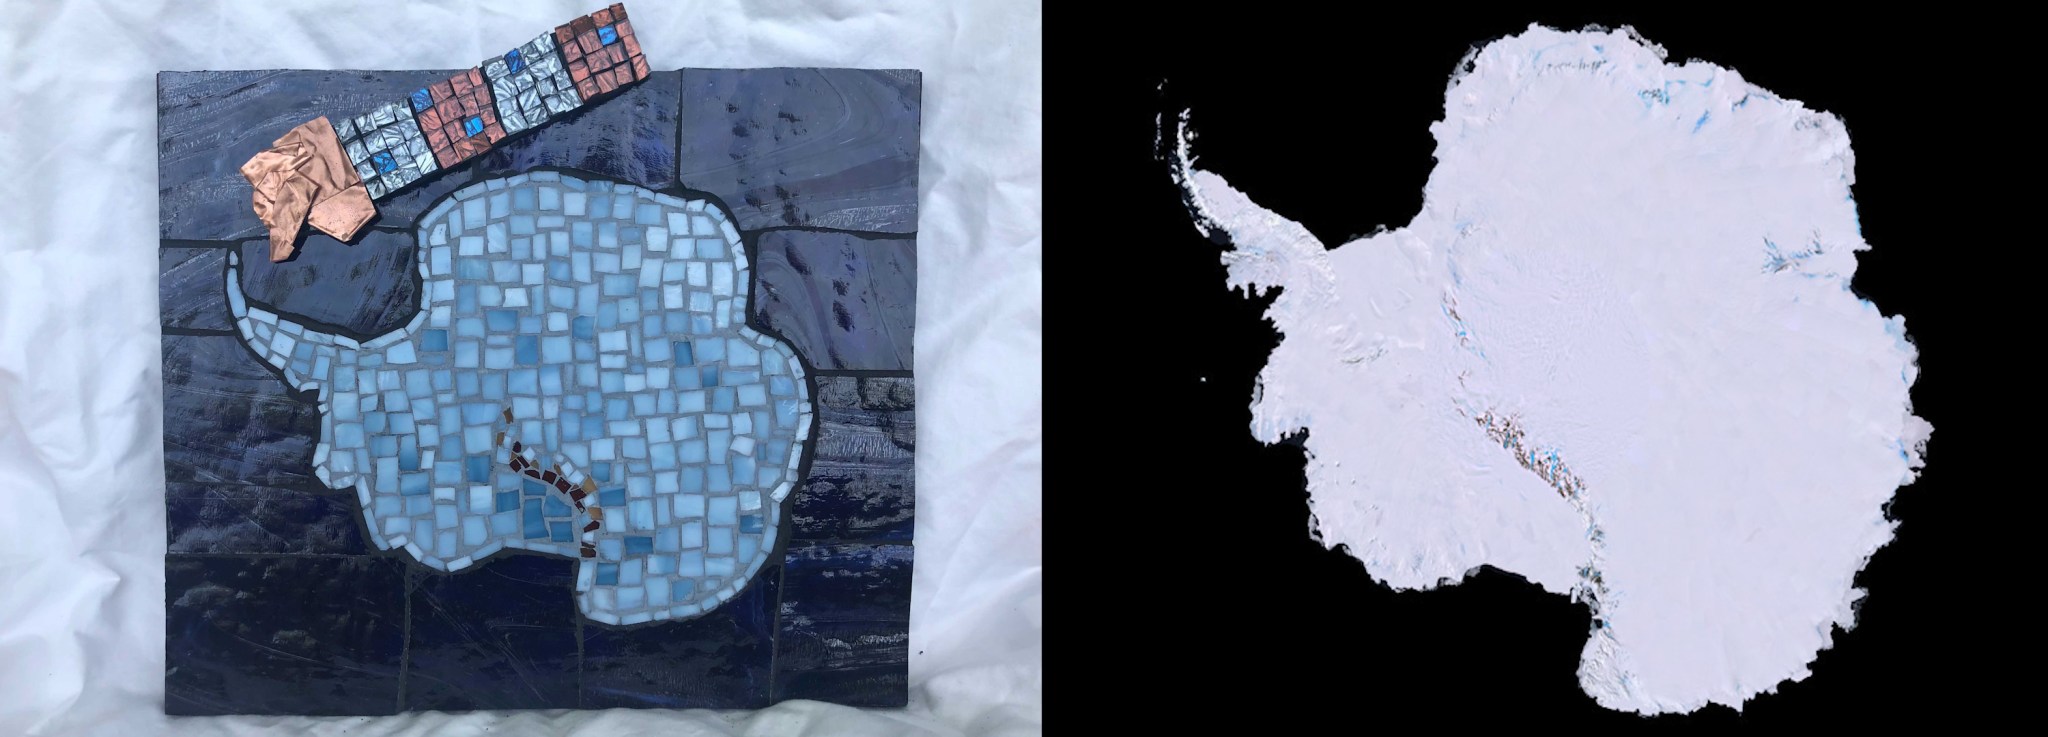 Two mosaics of Antarctica side by side. On the left, is a physical mosaic, made of tiny light blue glass squares. A blue and gold mosaiced satellite is positioned just above Antartica. On the right, the mosaic looks like an image of Antartica from space, stitched together from individual satellite frames to show the whole continent, white against a black background.